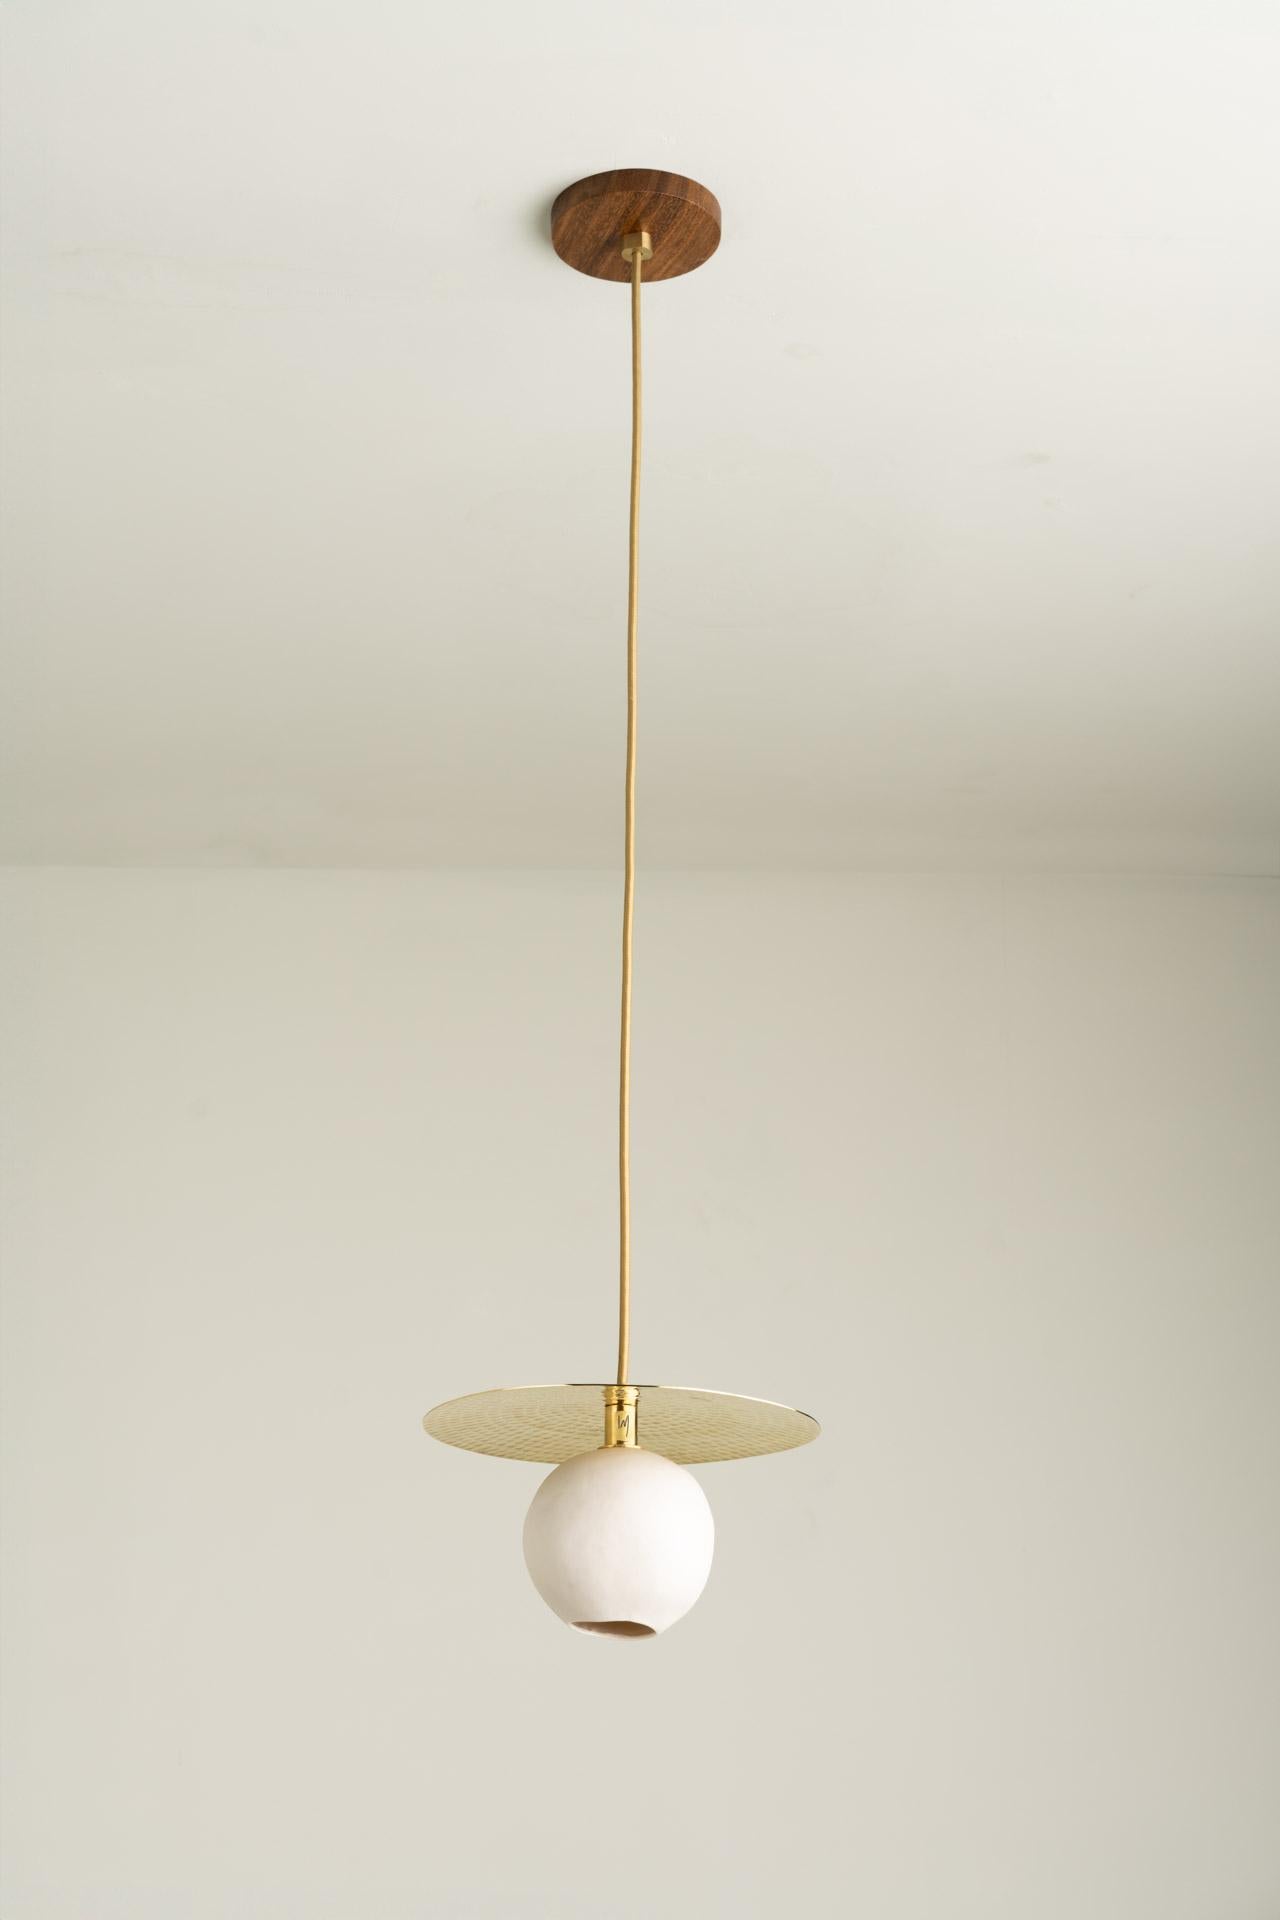 COMETA pendant light was designed for the Atomic collection by Mexican artist Isabel Moncada.

The hand-hammered brass disc is the artisanal work that stars in this minimalist piece. In addition to giving character to the design, it has the function